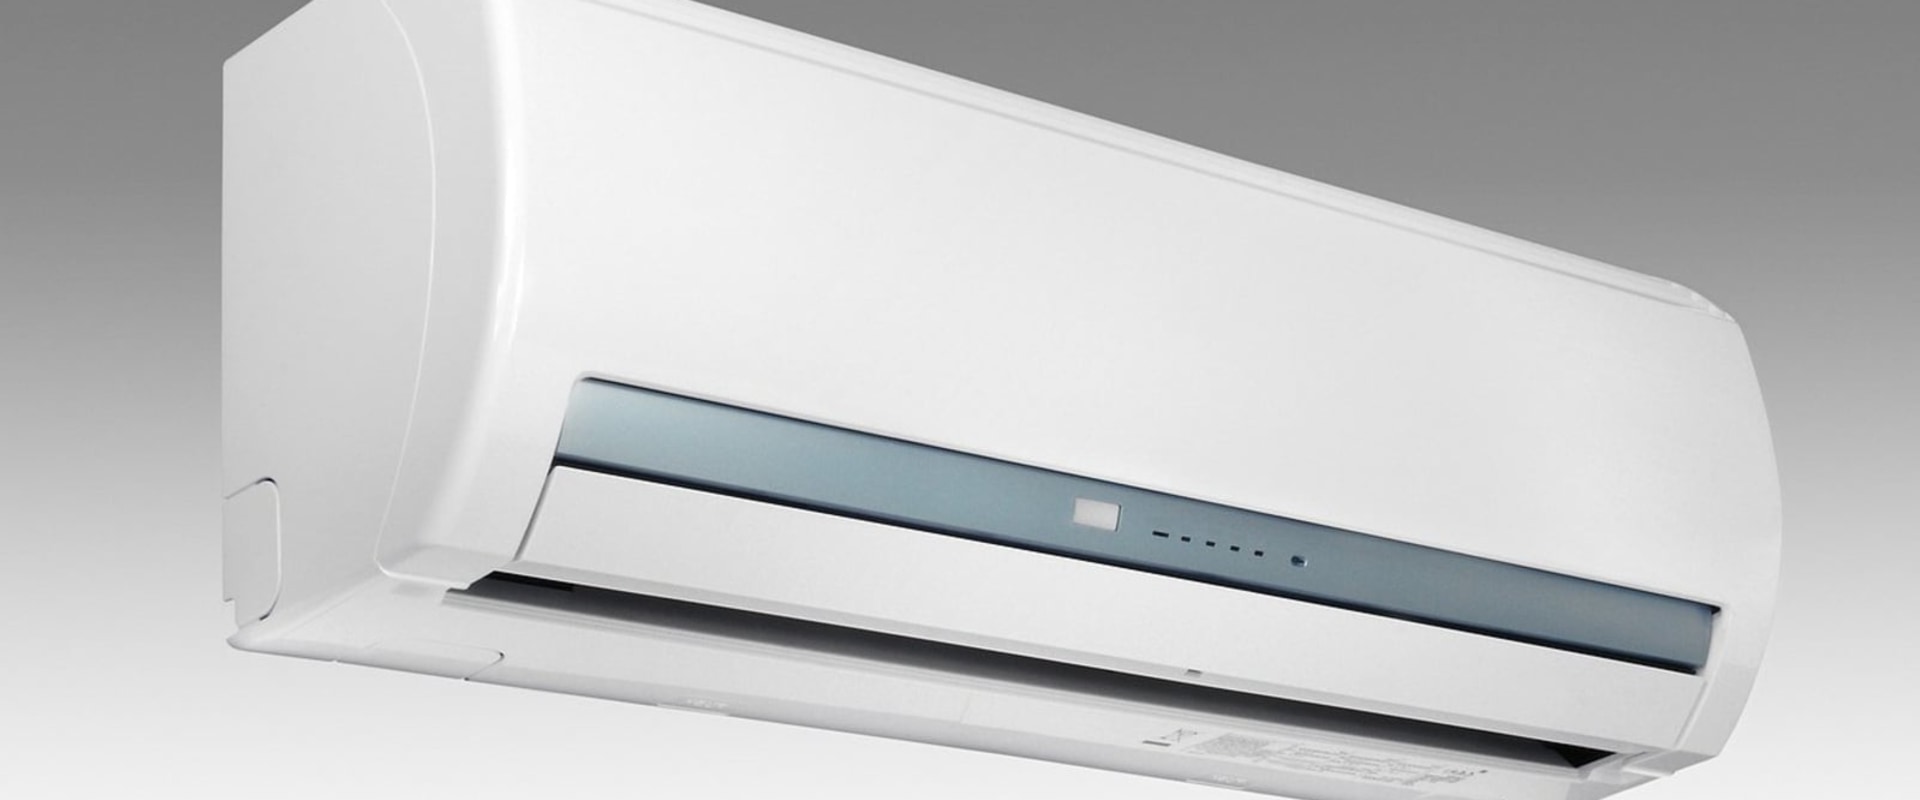 The Best Brands in the Air Conditioning Industry